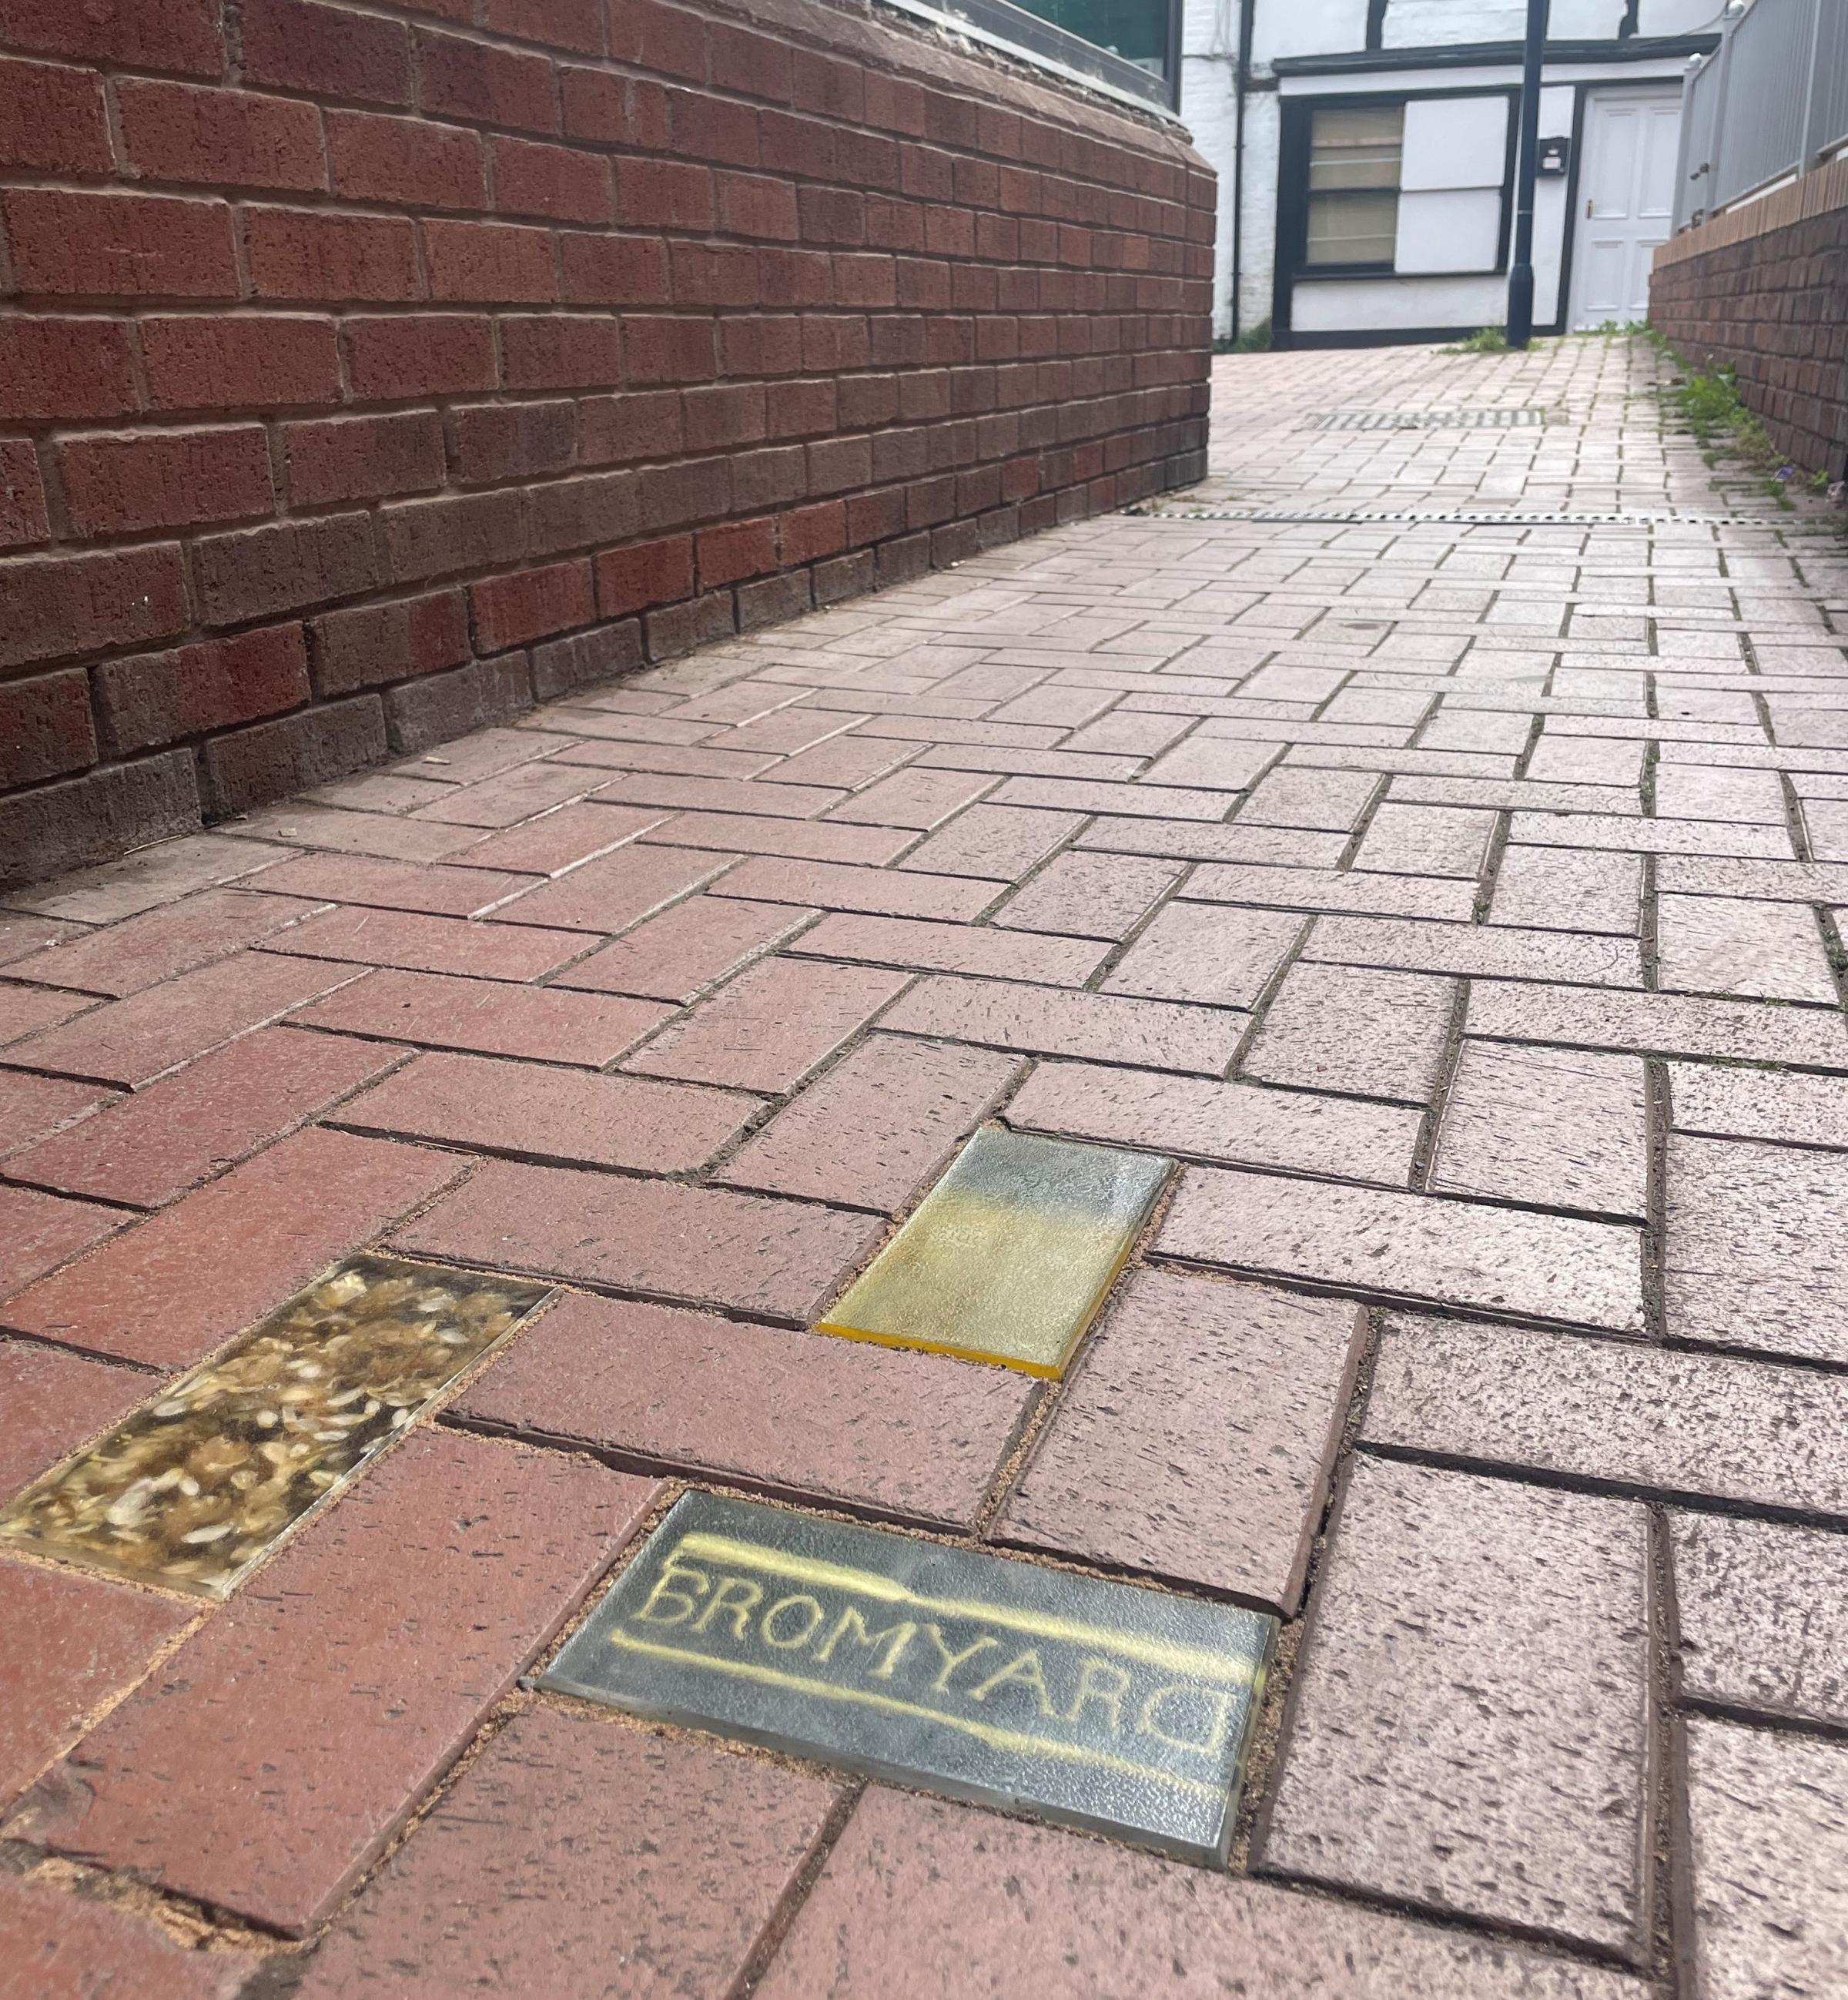 New bricks at the side of the Bromyard Centre in Cruxwell Street, as part of the Destination Bromyard project